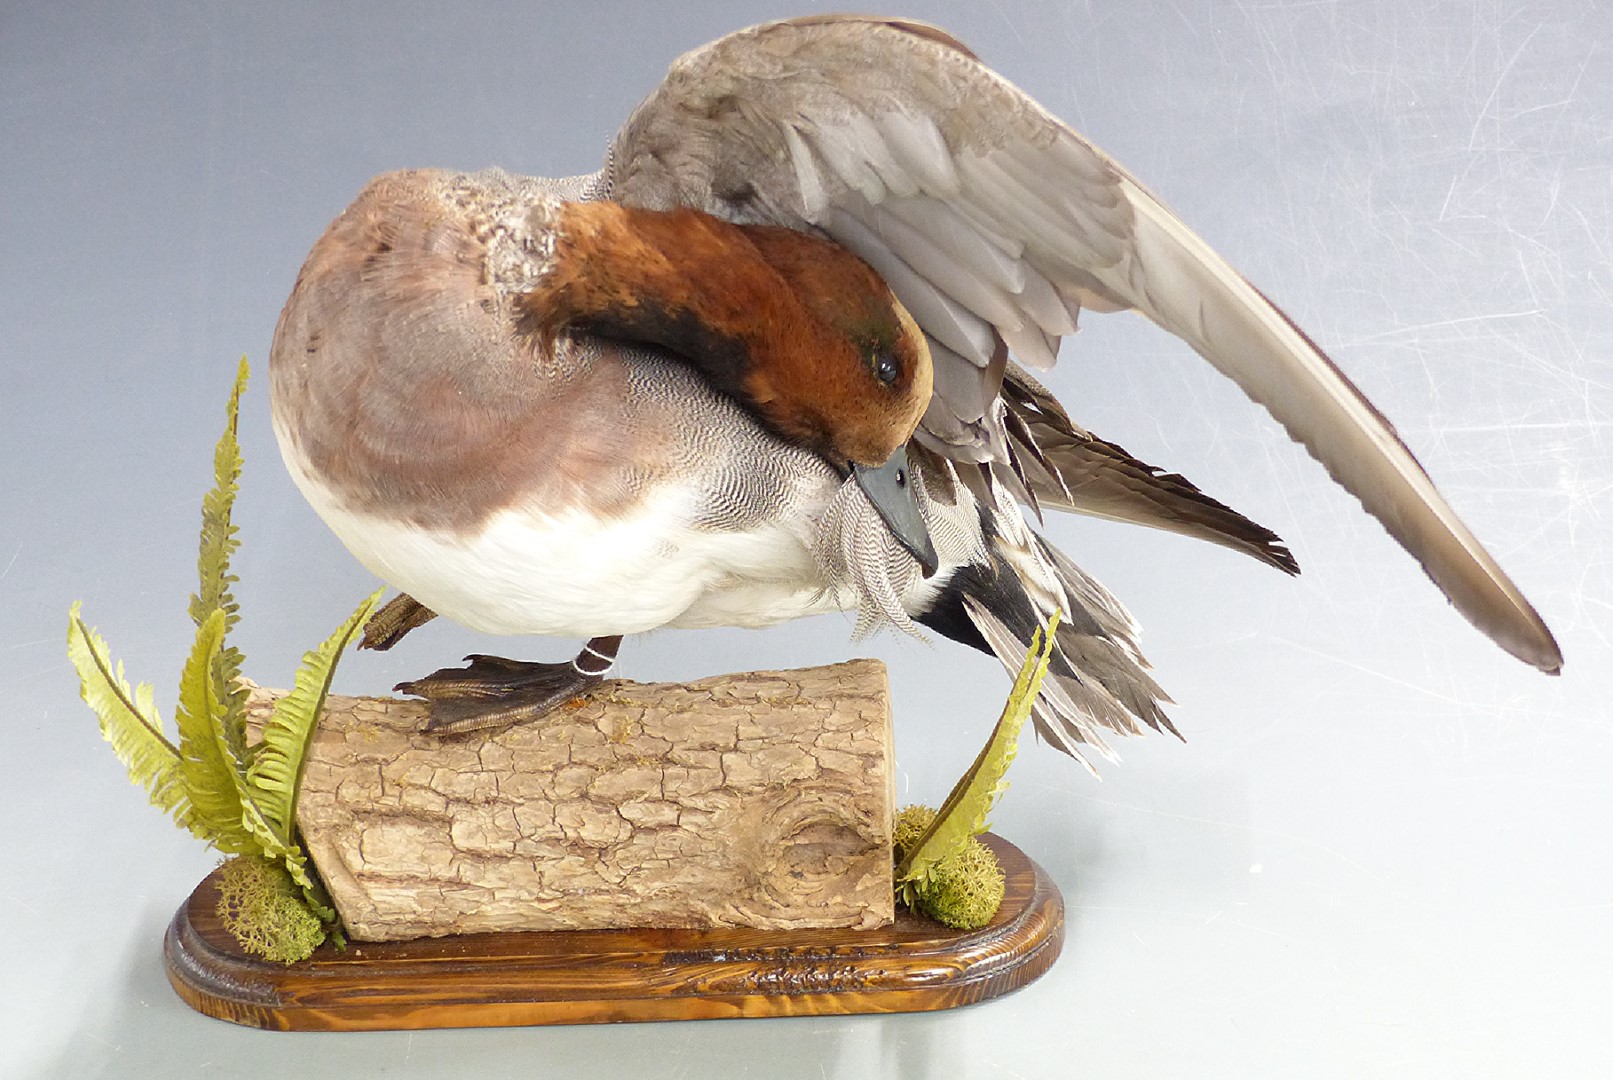 Taxidermy study of a Widgeon duck raised on a log with two ferns, H27cm